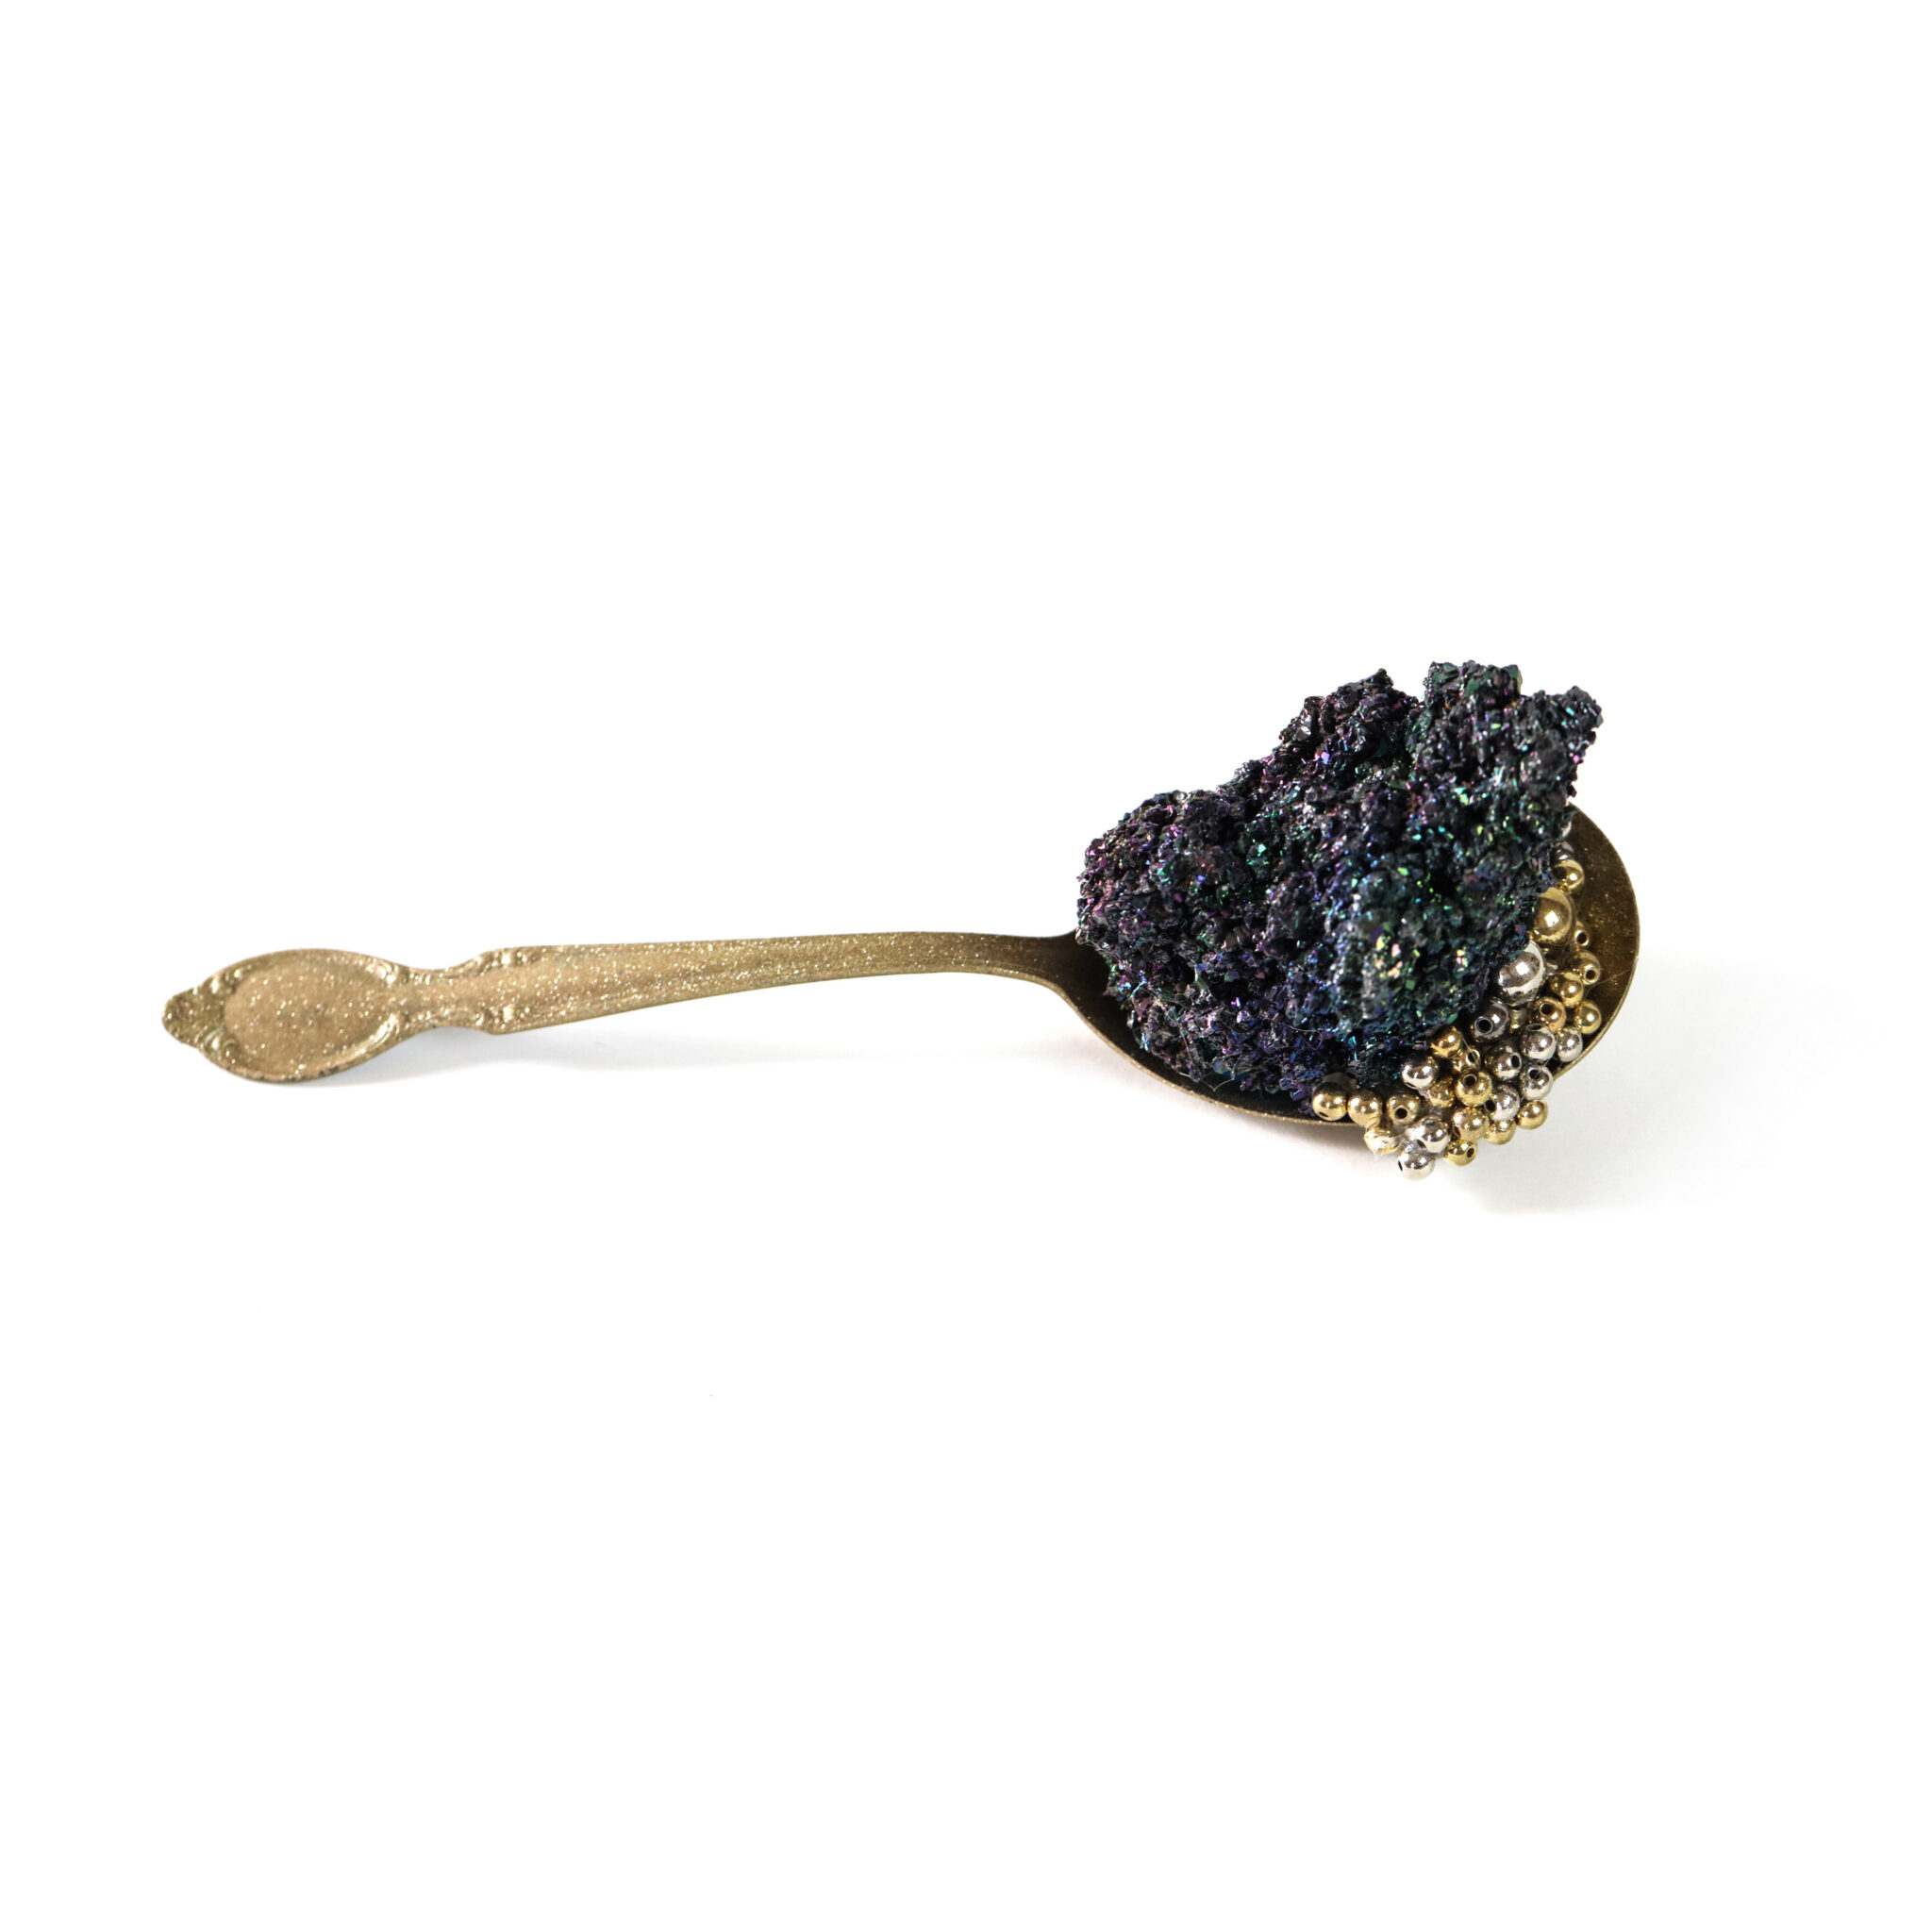 mixed media sculpture including a gold colored spoon holding multiple objects | Art by Sarah Walko